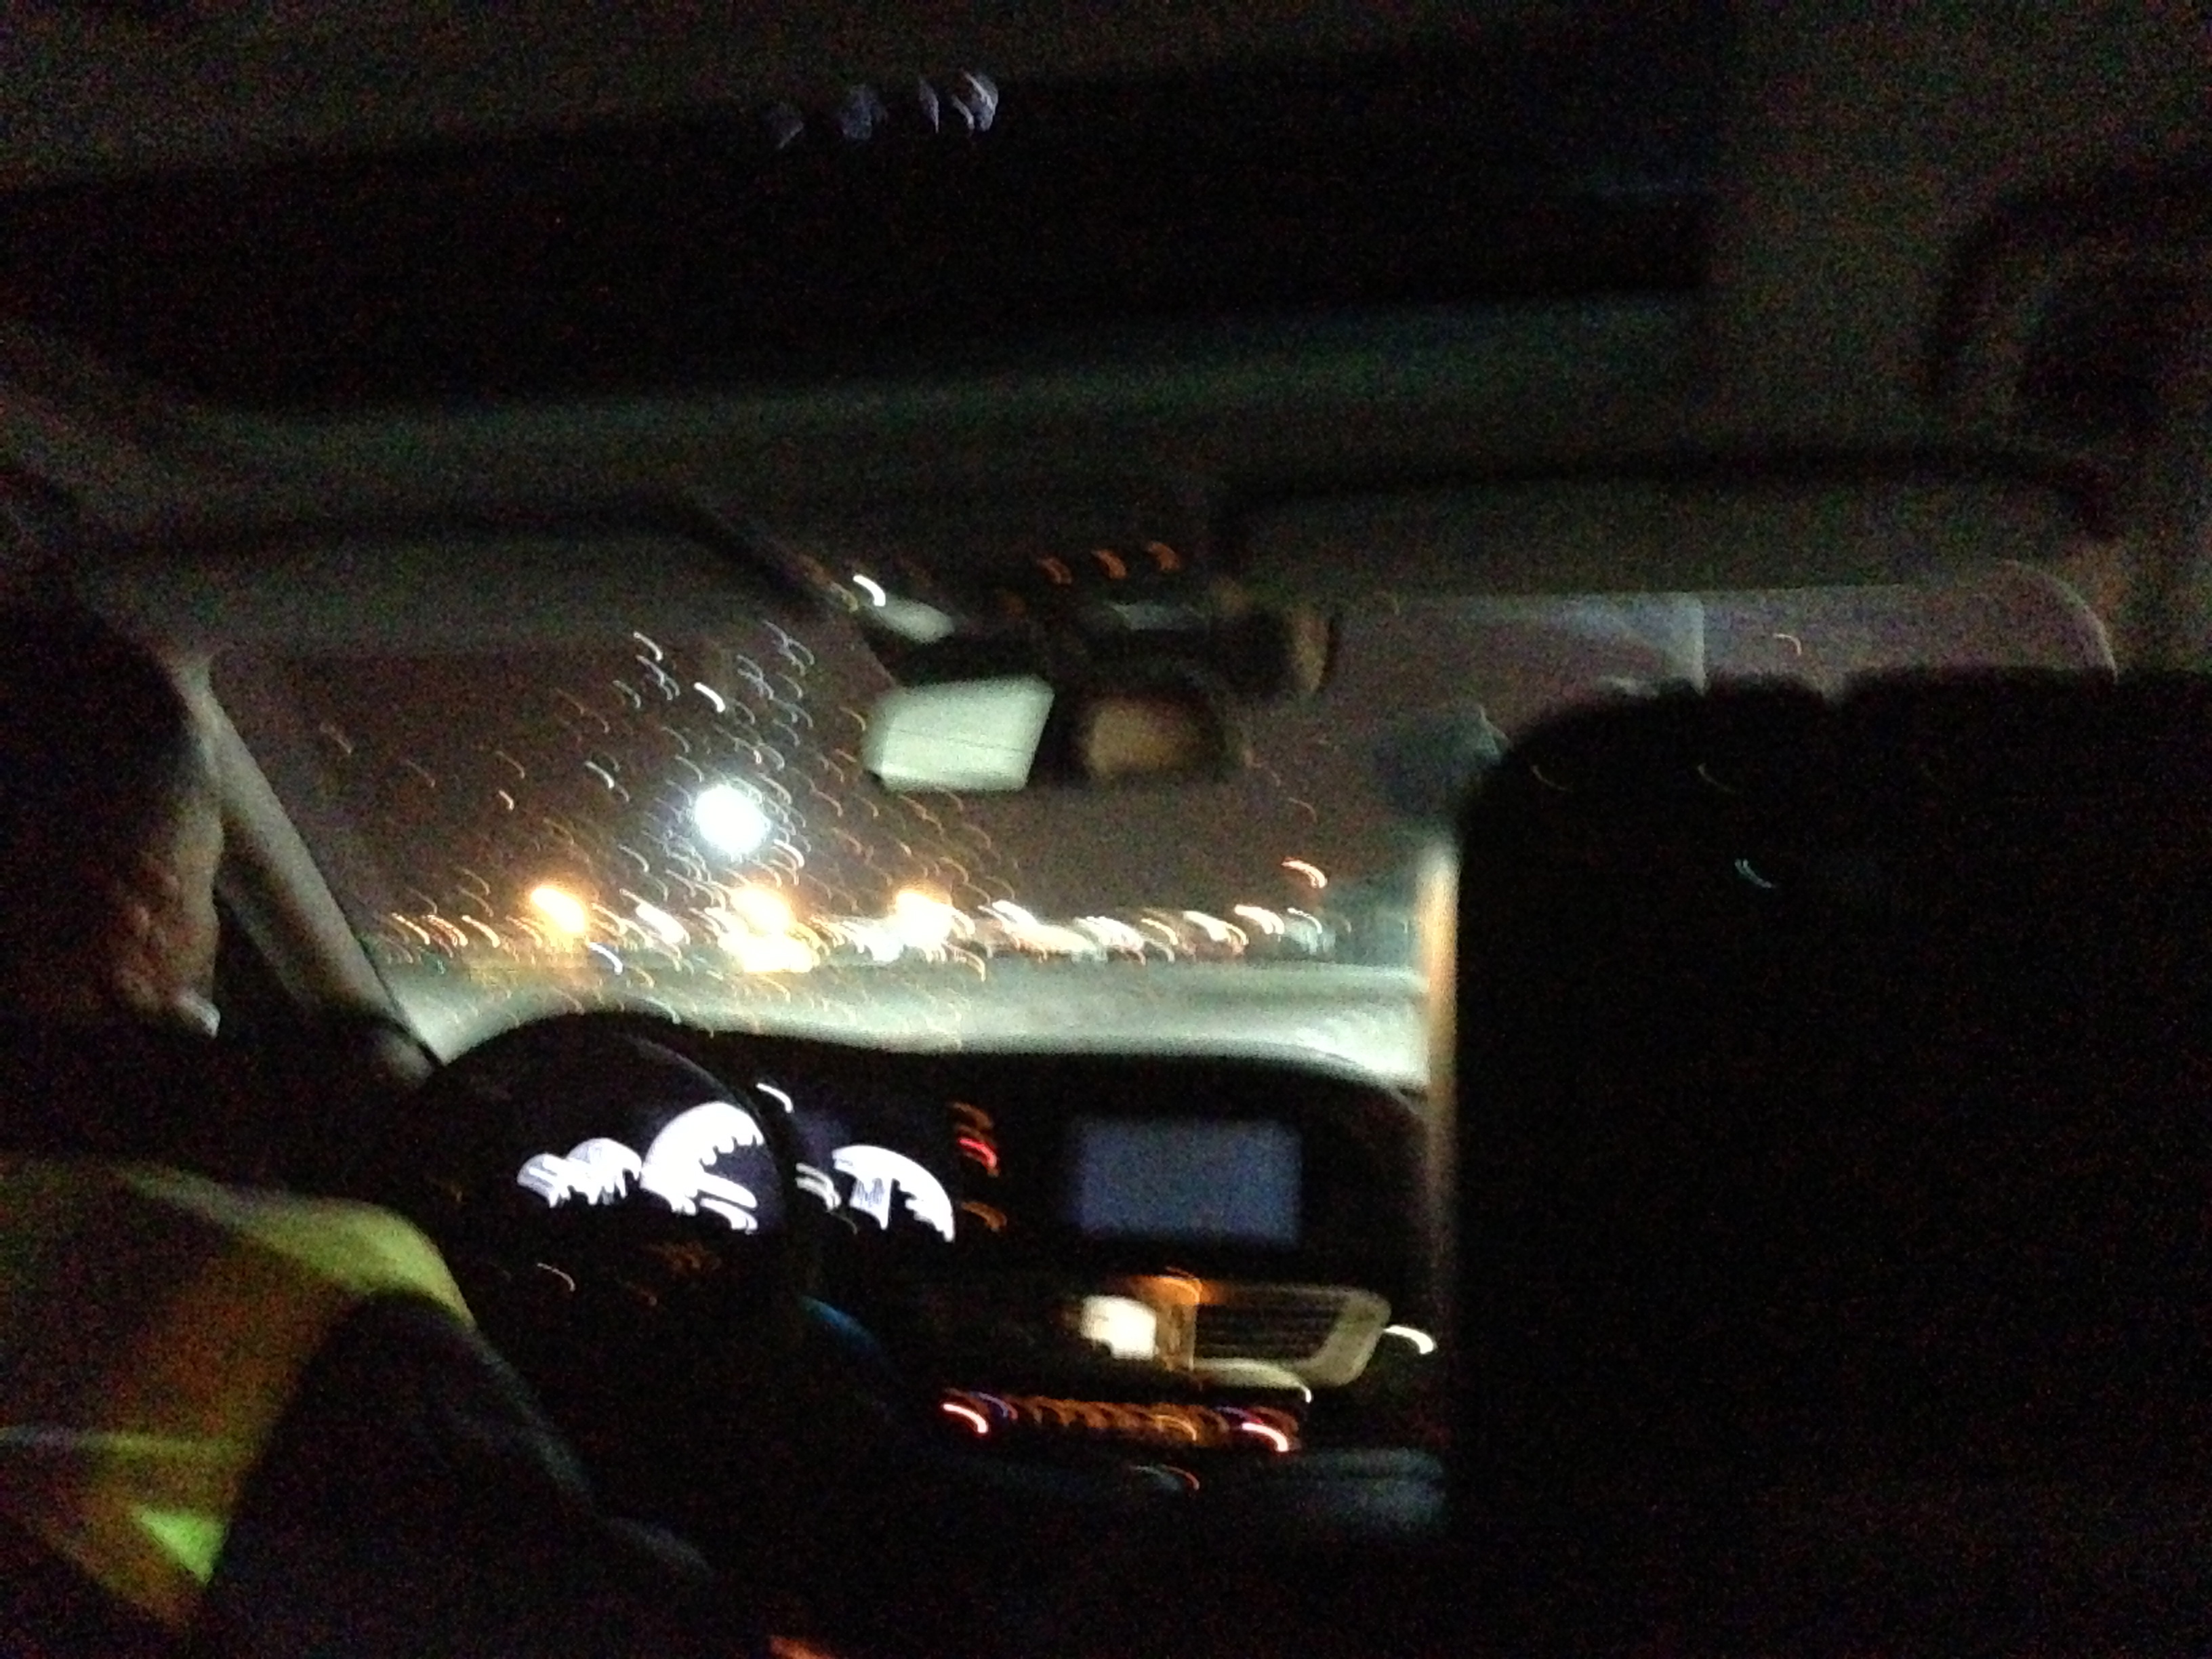 a view from inside of a car at night